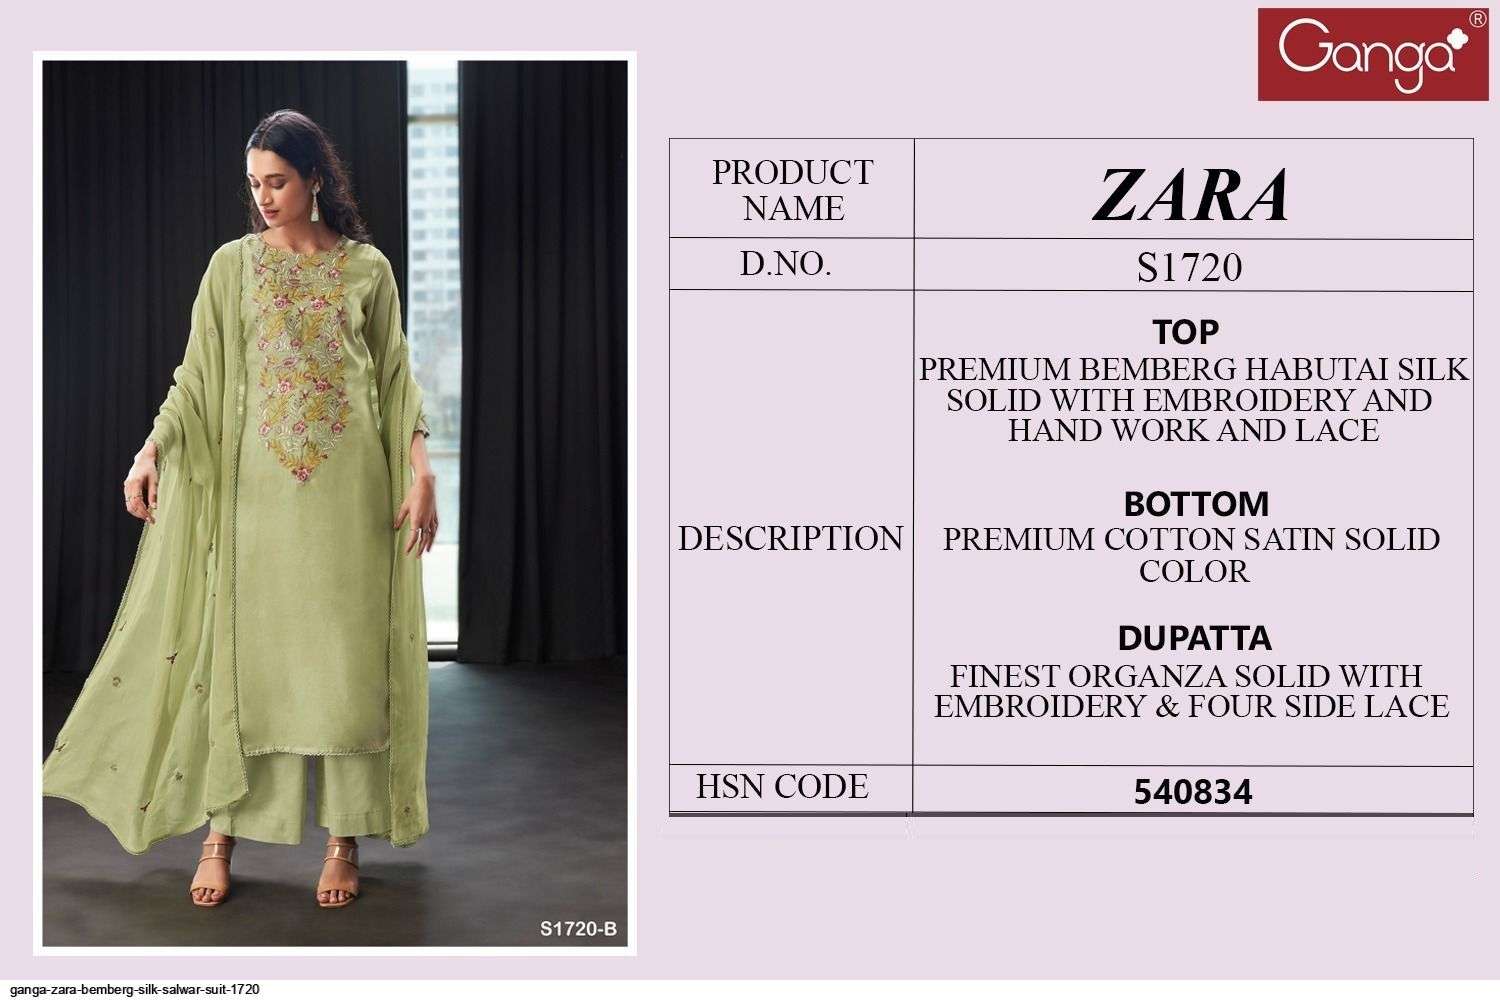 Trendy Wholesale Zara Clothing At Affordable Prices 